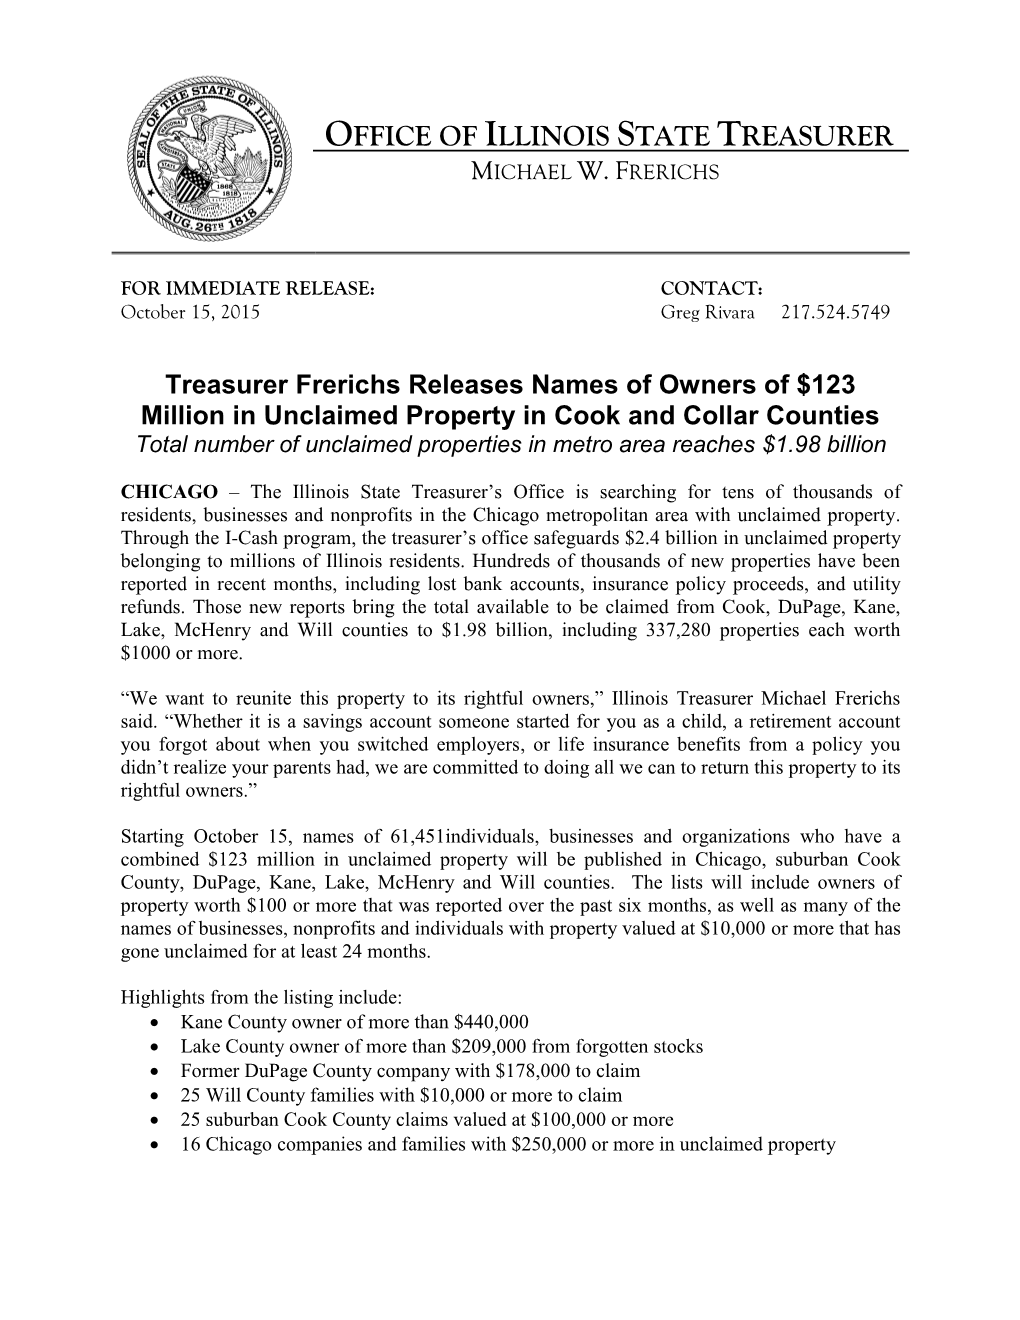 Treasurer Frerichs Releases Names of Owners of $123 Million In